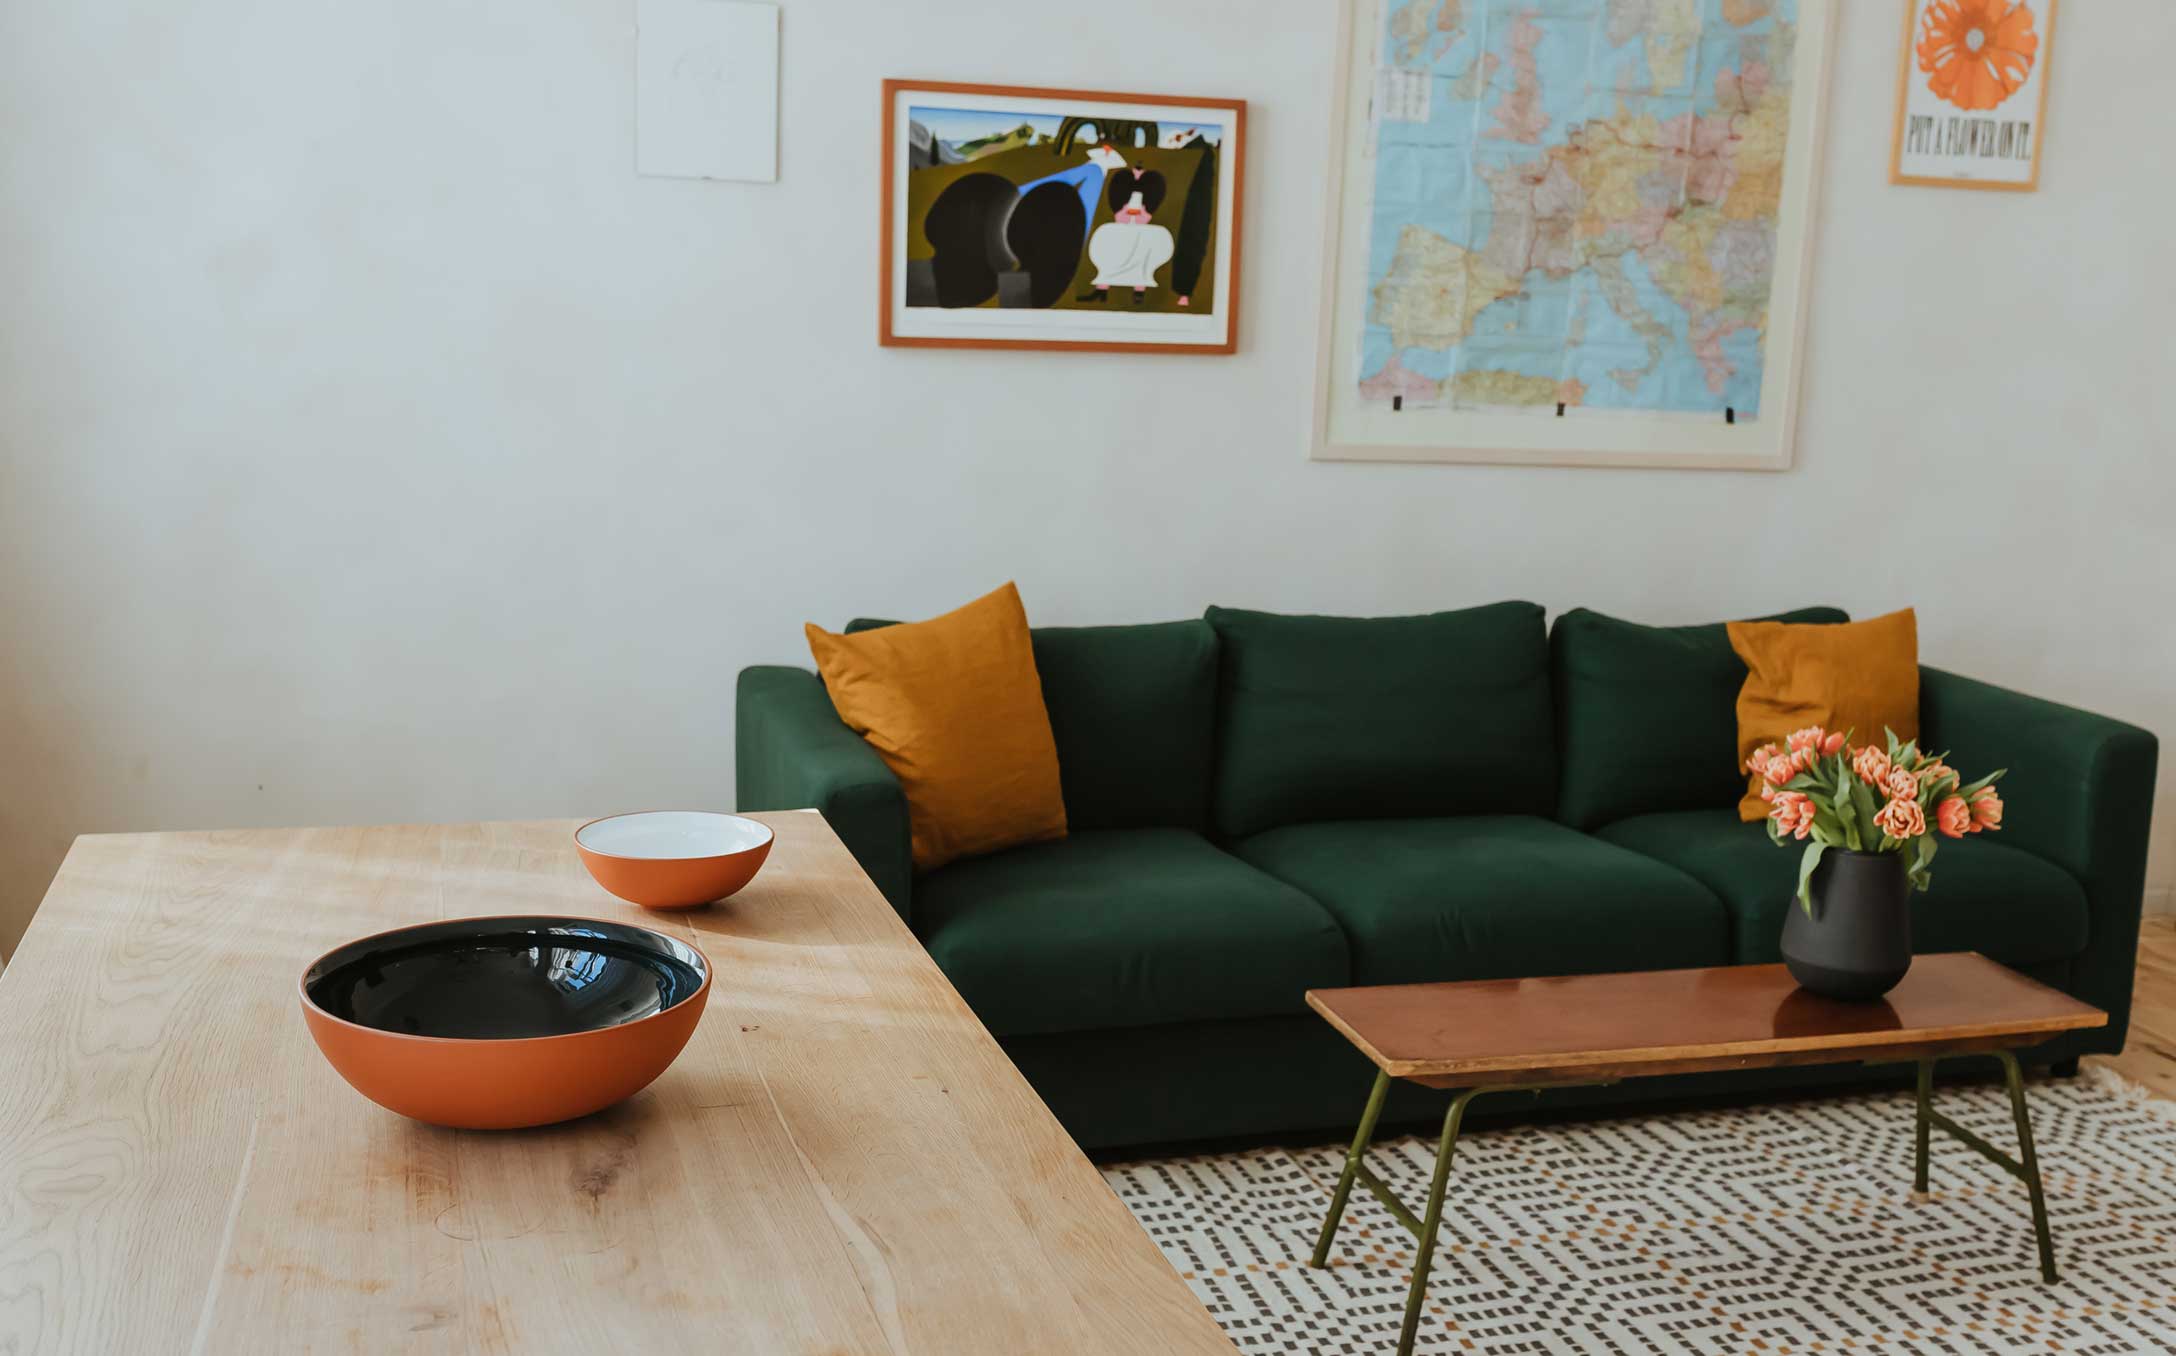 A living room setting with ceramic bowls